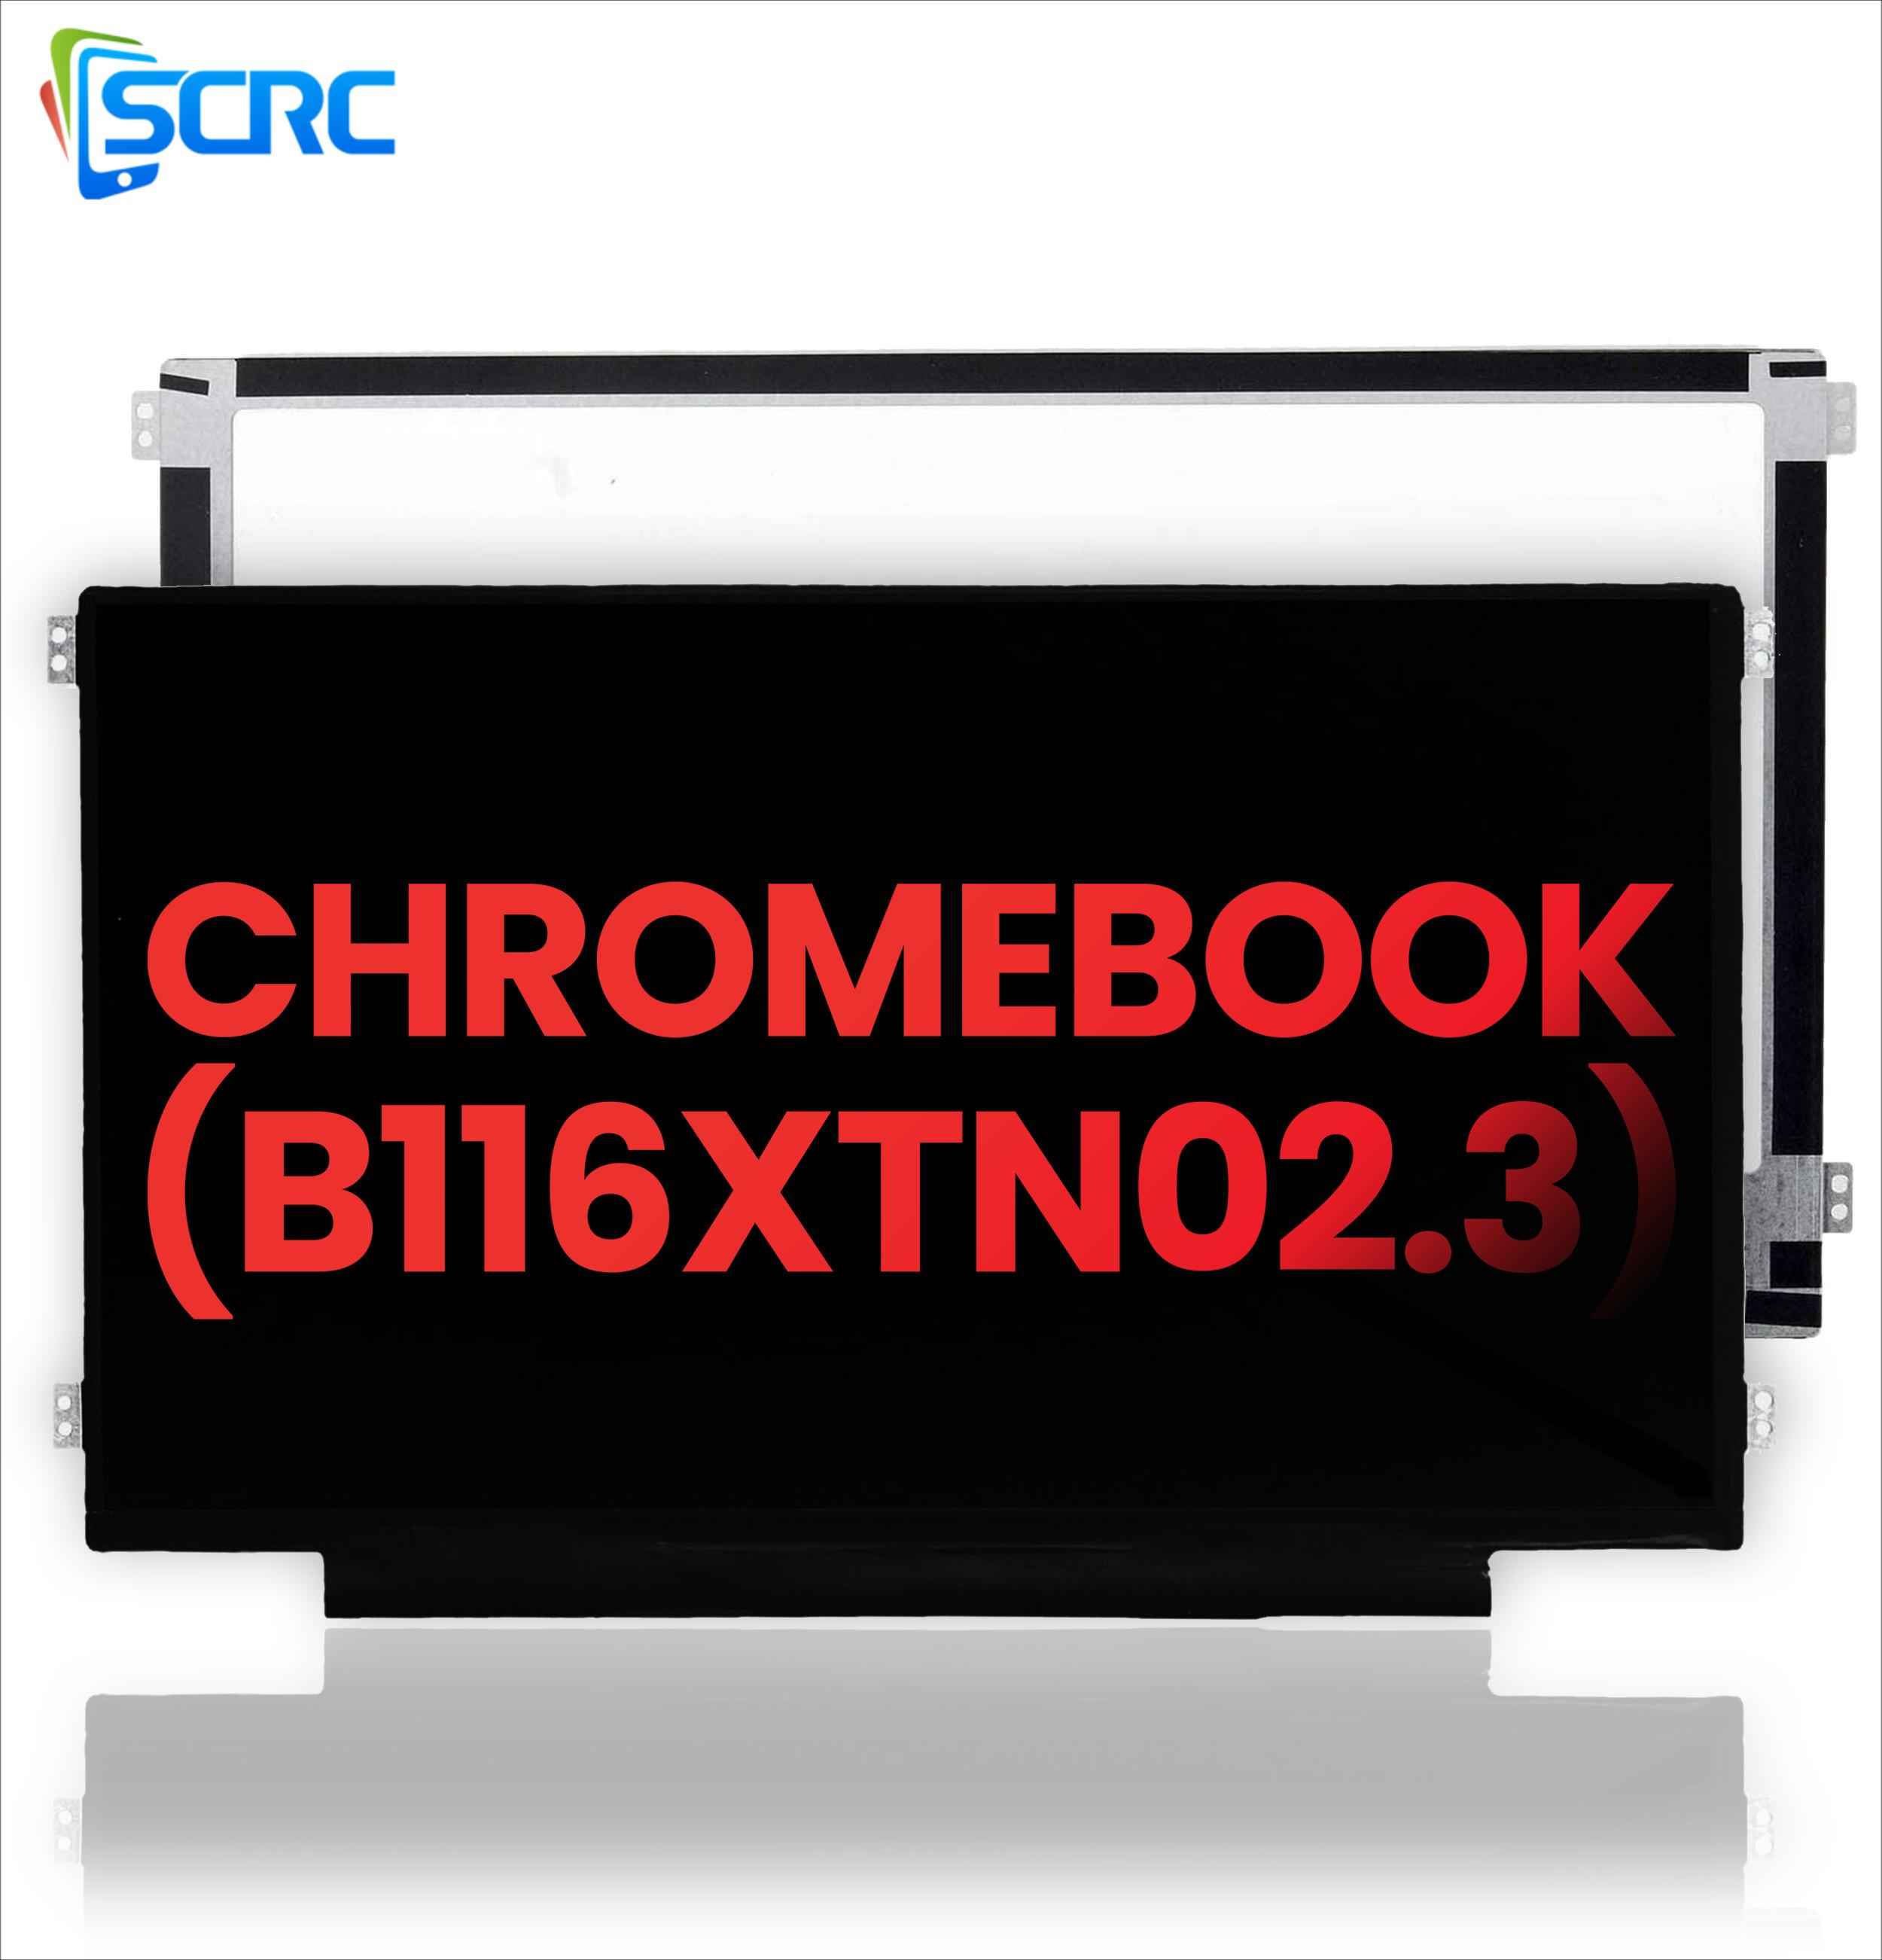 LCD Screen Replacement for DELL Chromebook B116XTN02.3